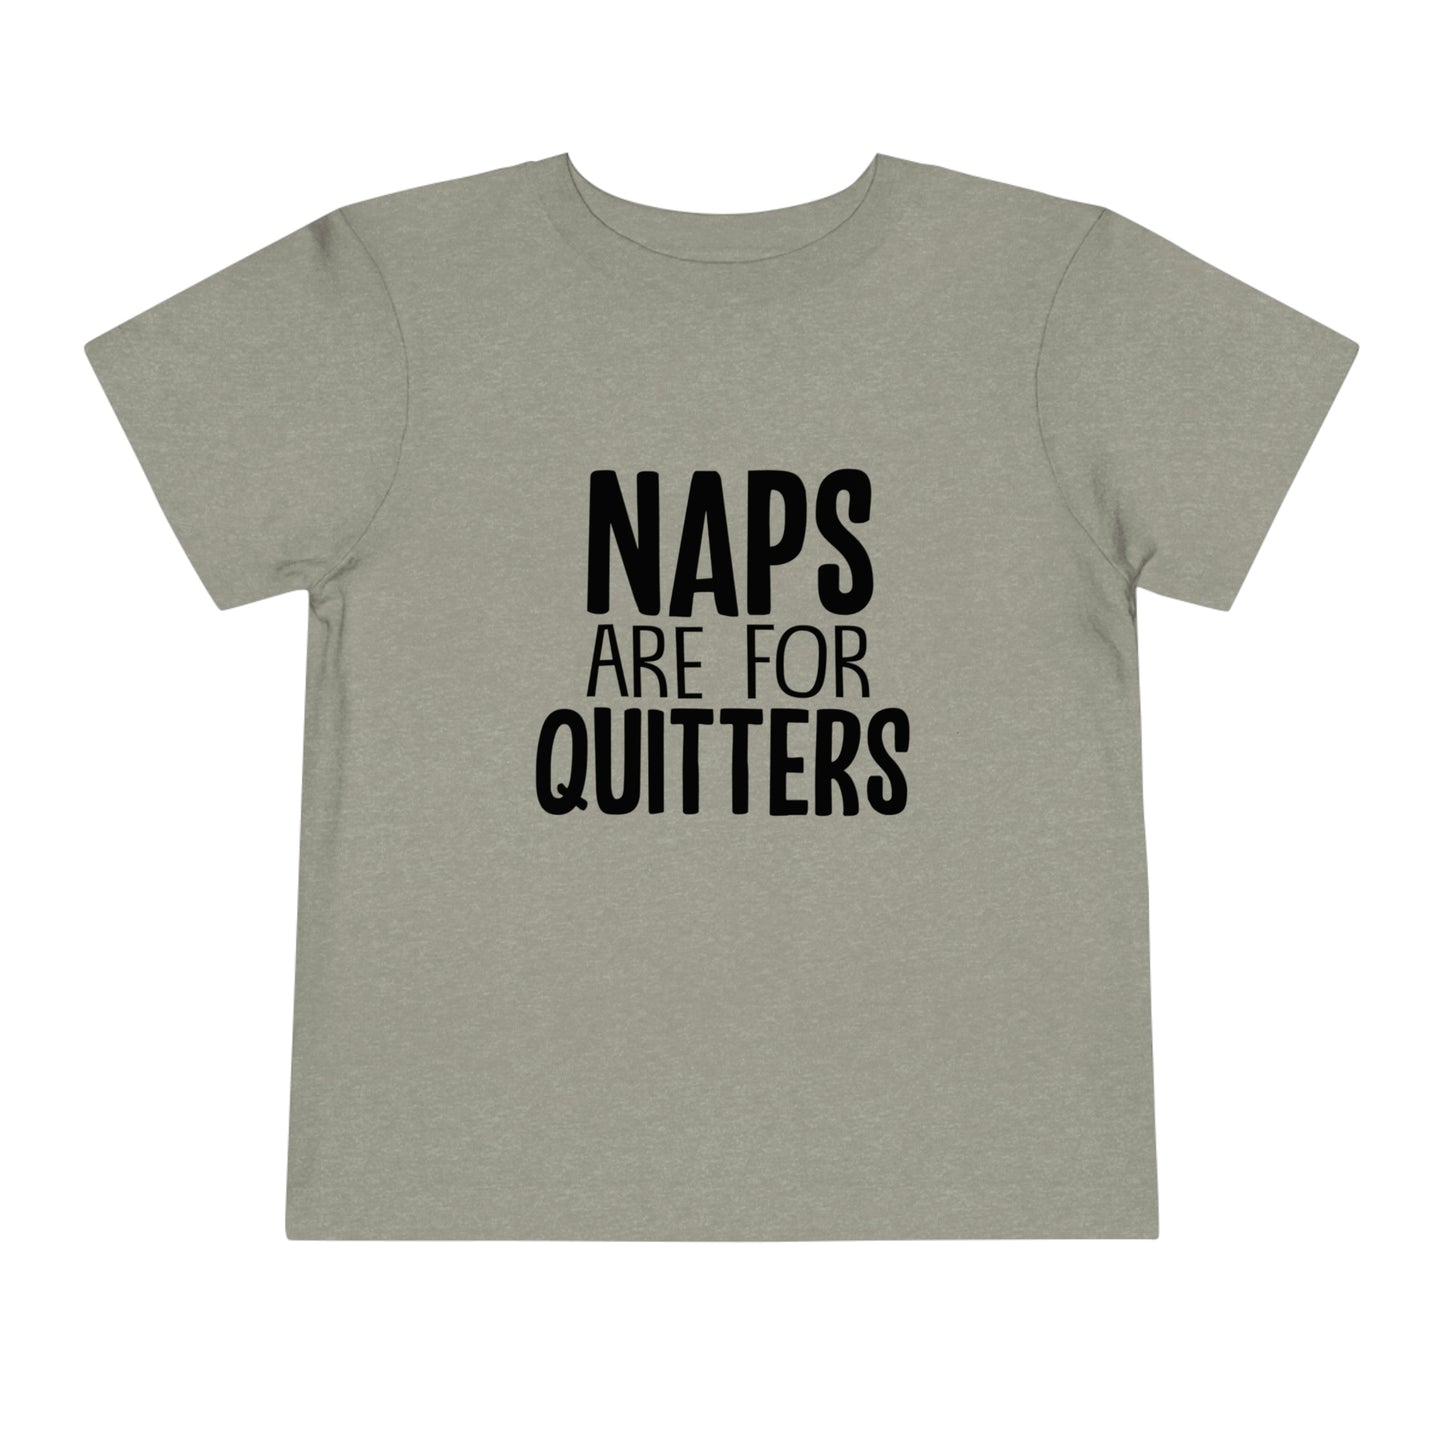 "Naps Are For Quitters" Toddler Short Sleeve Tee (2T-5T)